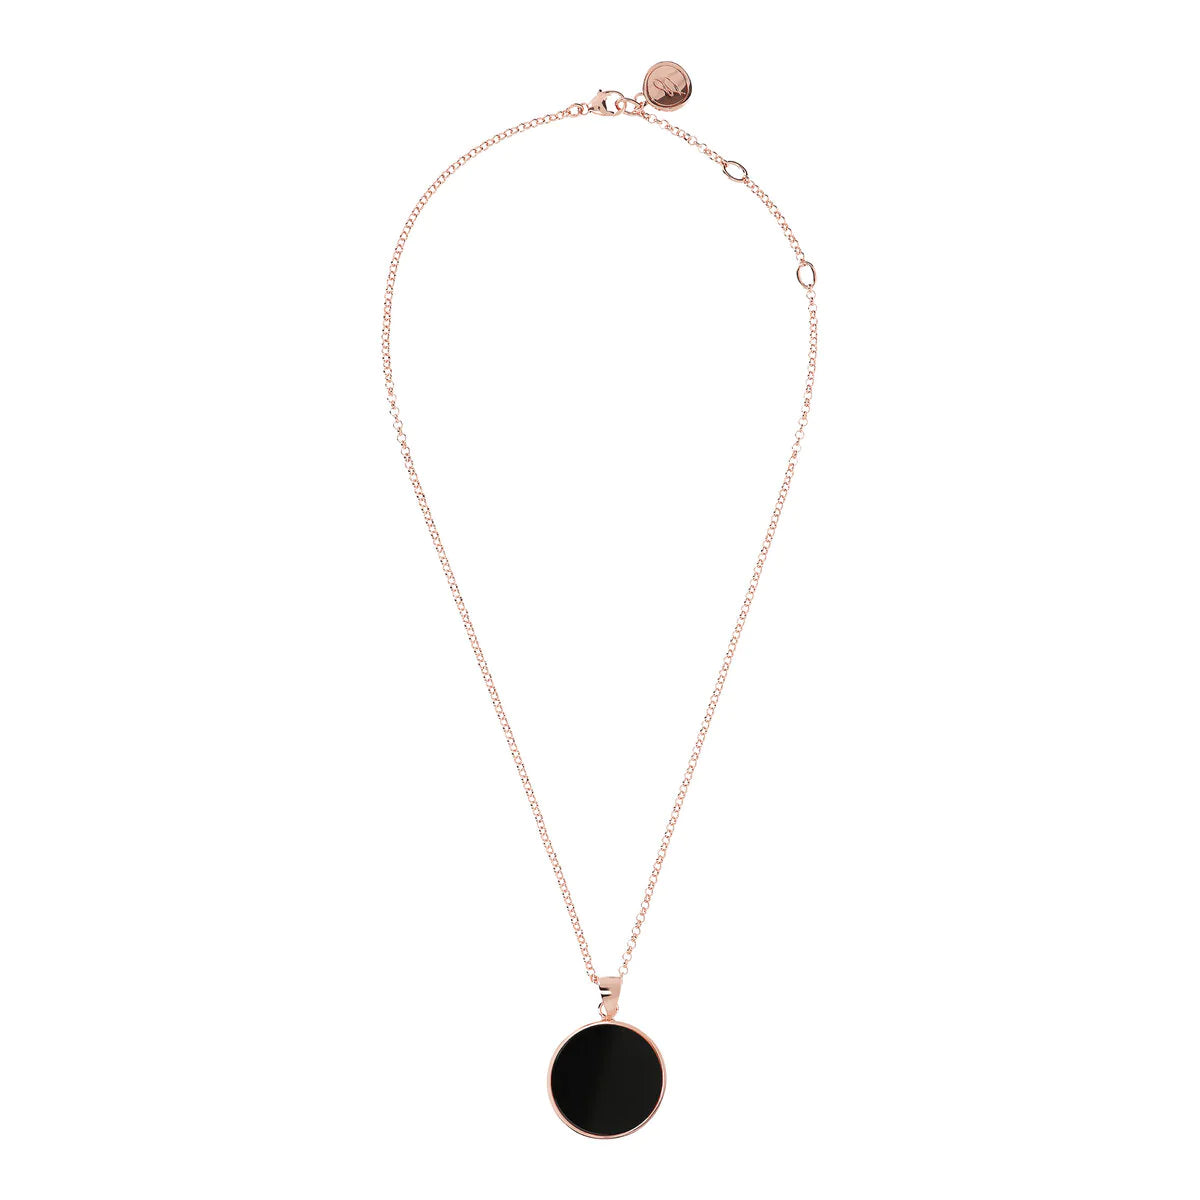 BRONZALLURE ROSE GOLD + ONYX NECKLACE